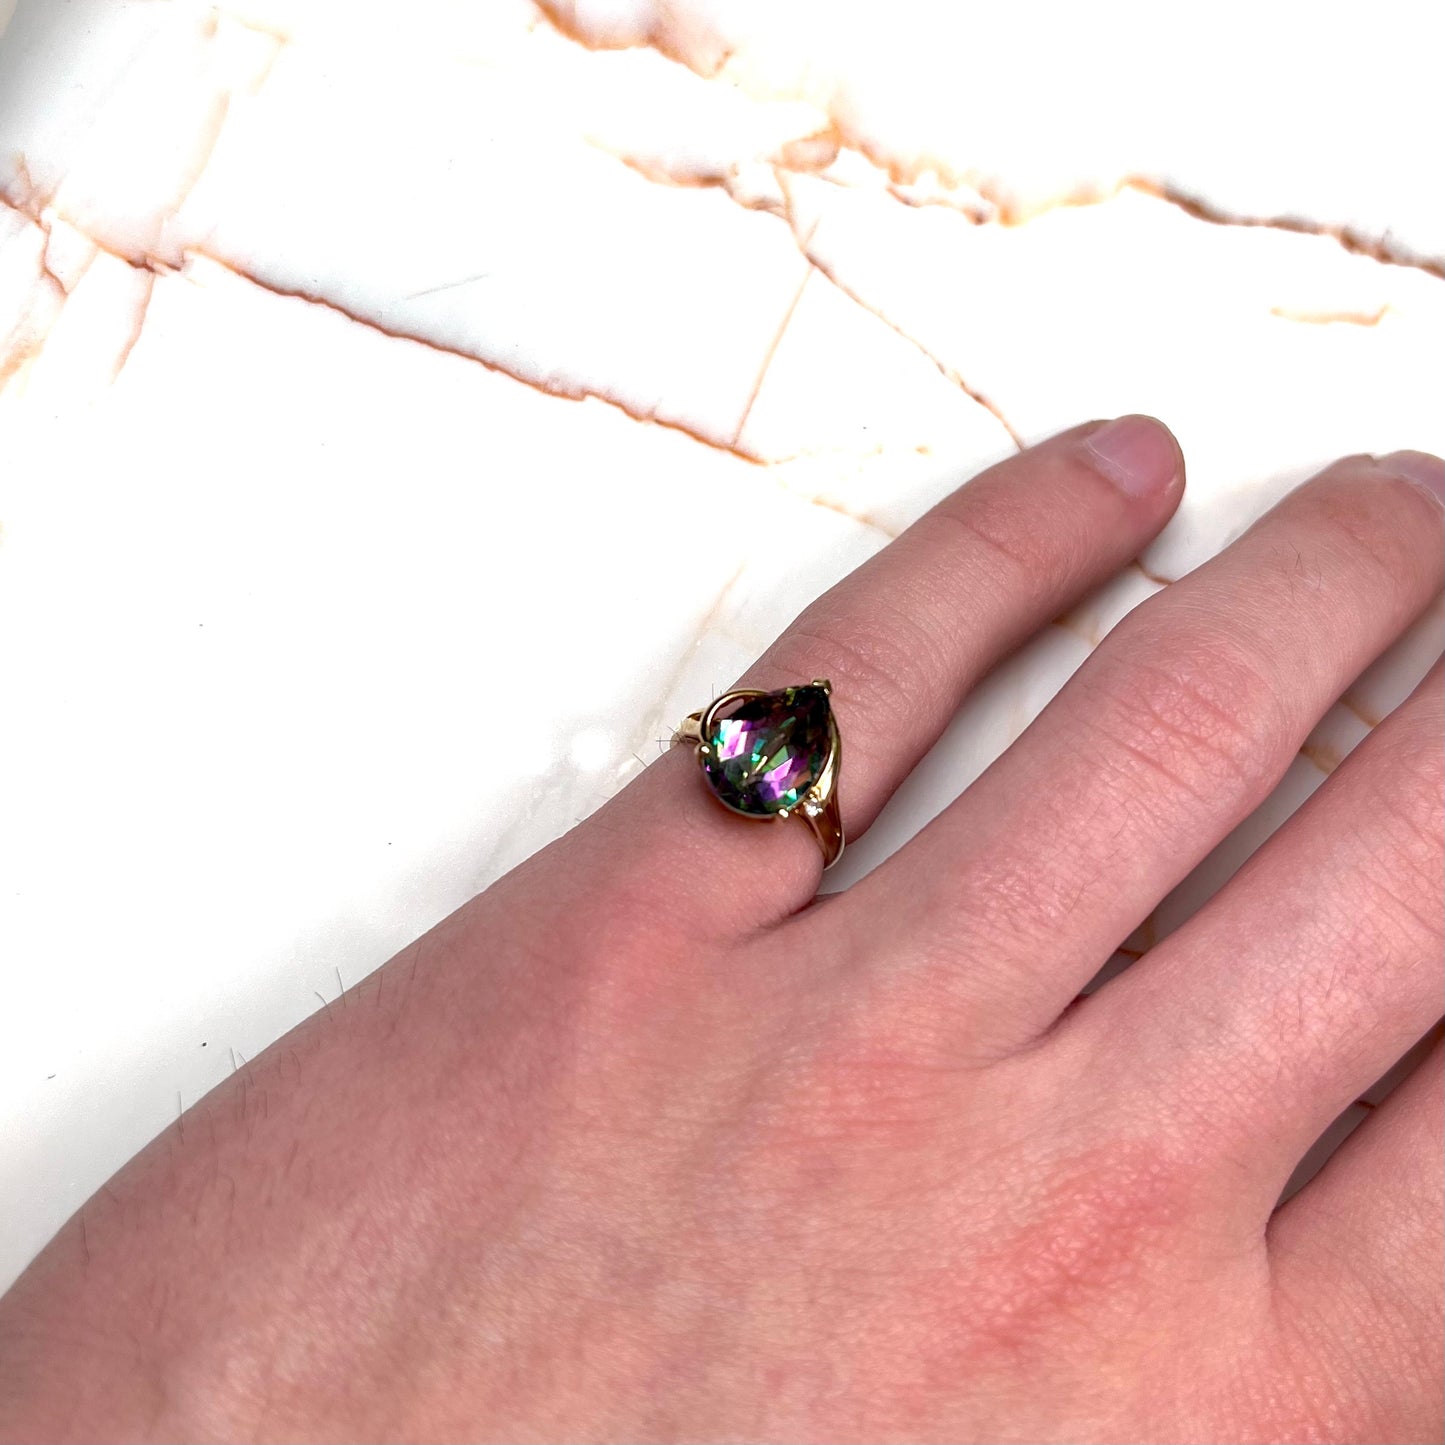 Pear shape green and pink mystic topaz set in a yellow gold ring with a single round diamond.